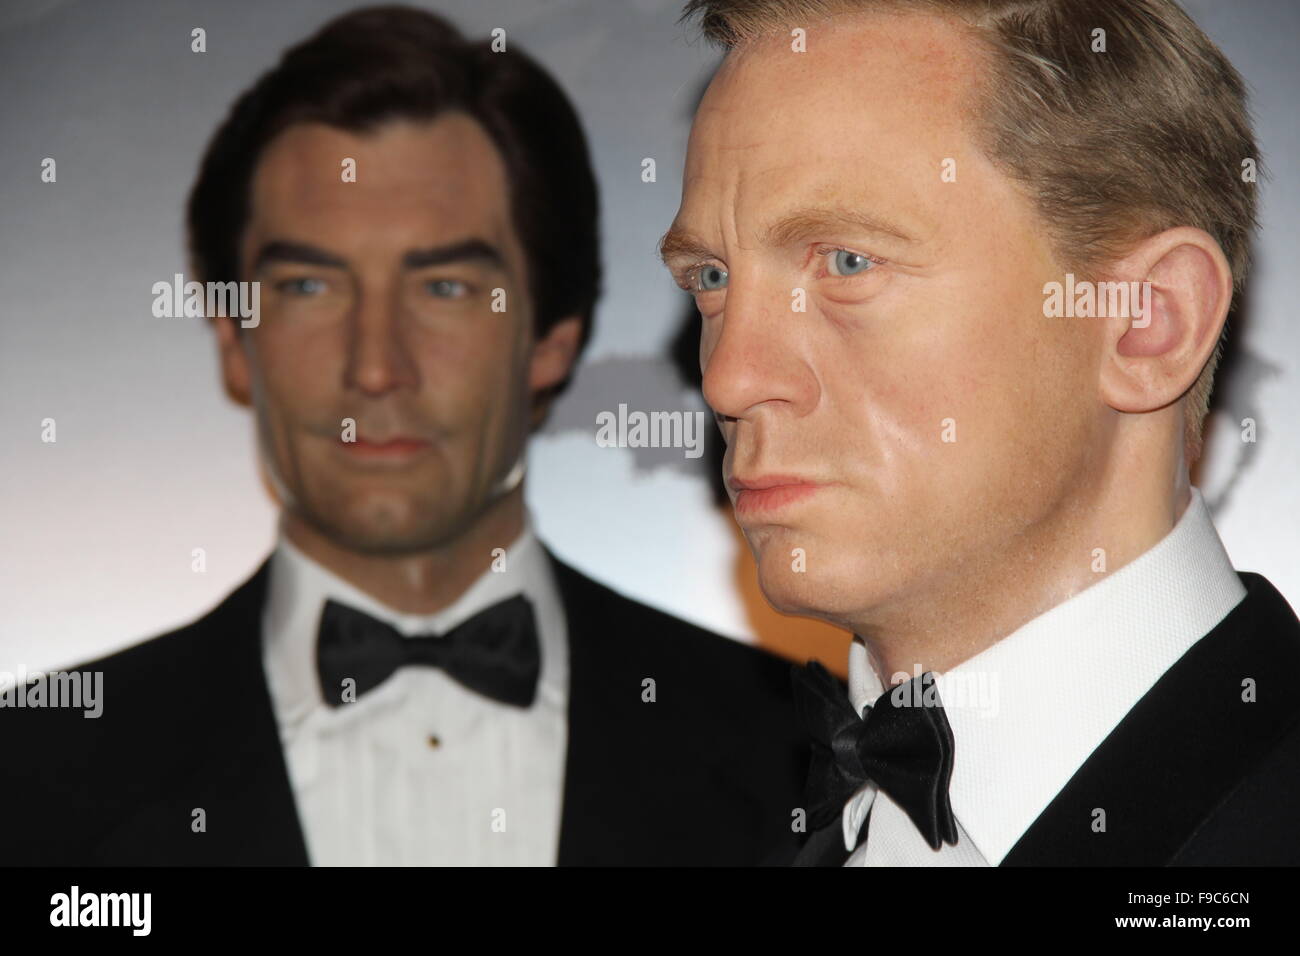 Hollywood, California, USA. 15th Dec, 2015. I15797CHW.Madame Tussauds Hollywood Reveal All Six James Bonds In Wax With Special Guest George Lazenby Madame Tussauds-Hollywood, Hollywood, CA.12/15/2015.WAX FIGURE OF JAMES BOND CHARACTER ACTORS TIMOTHY DALTON AND DANIEL CRAIG .©Clinton H. Wallace/Photomundo International/ Photos Inc © Clinton Wallace/Globe Photos/ZUMA Wire/Alamy Live News Stock Photo